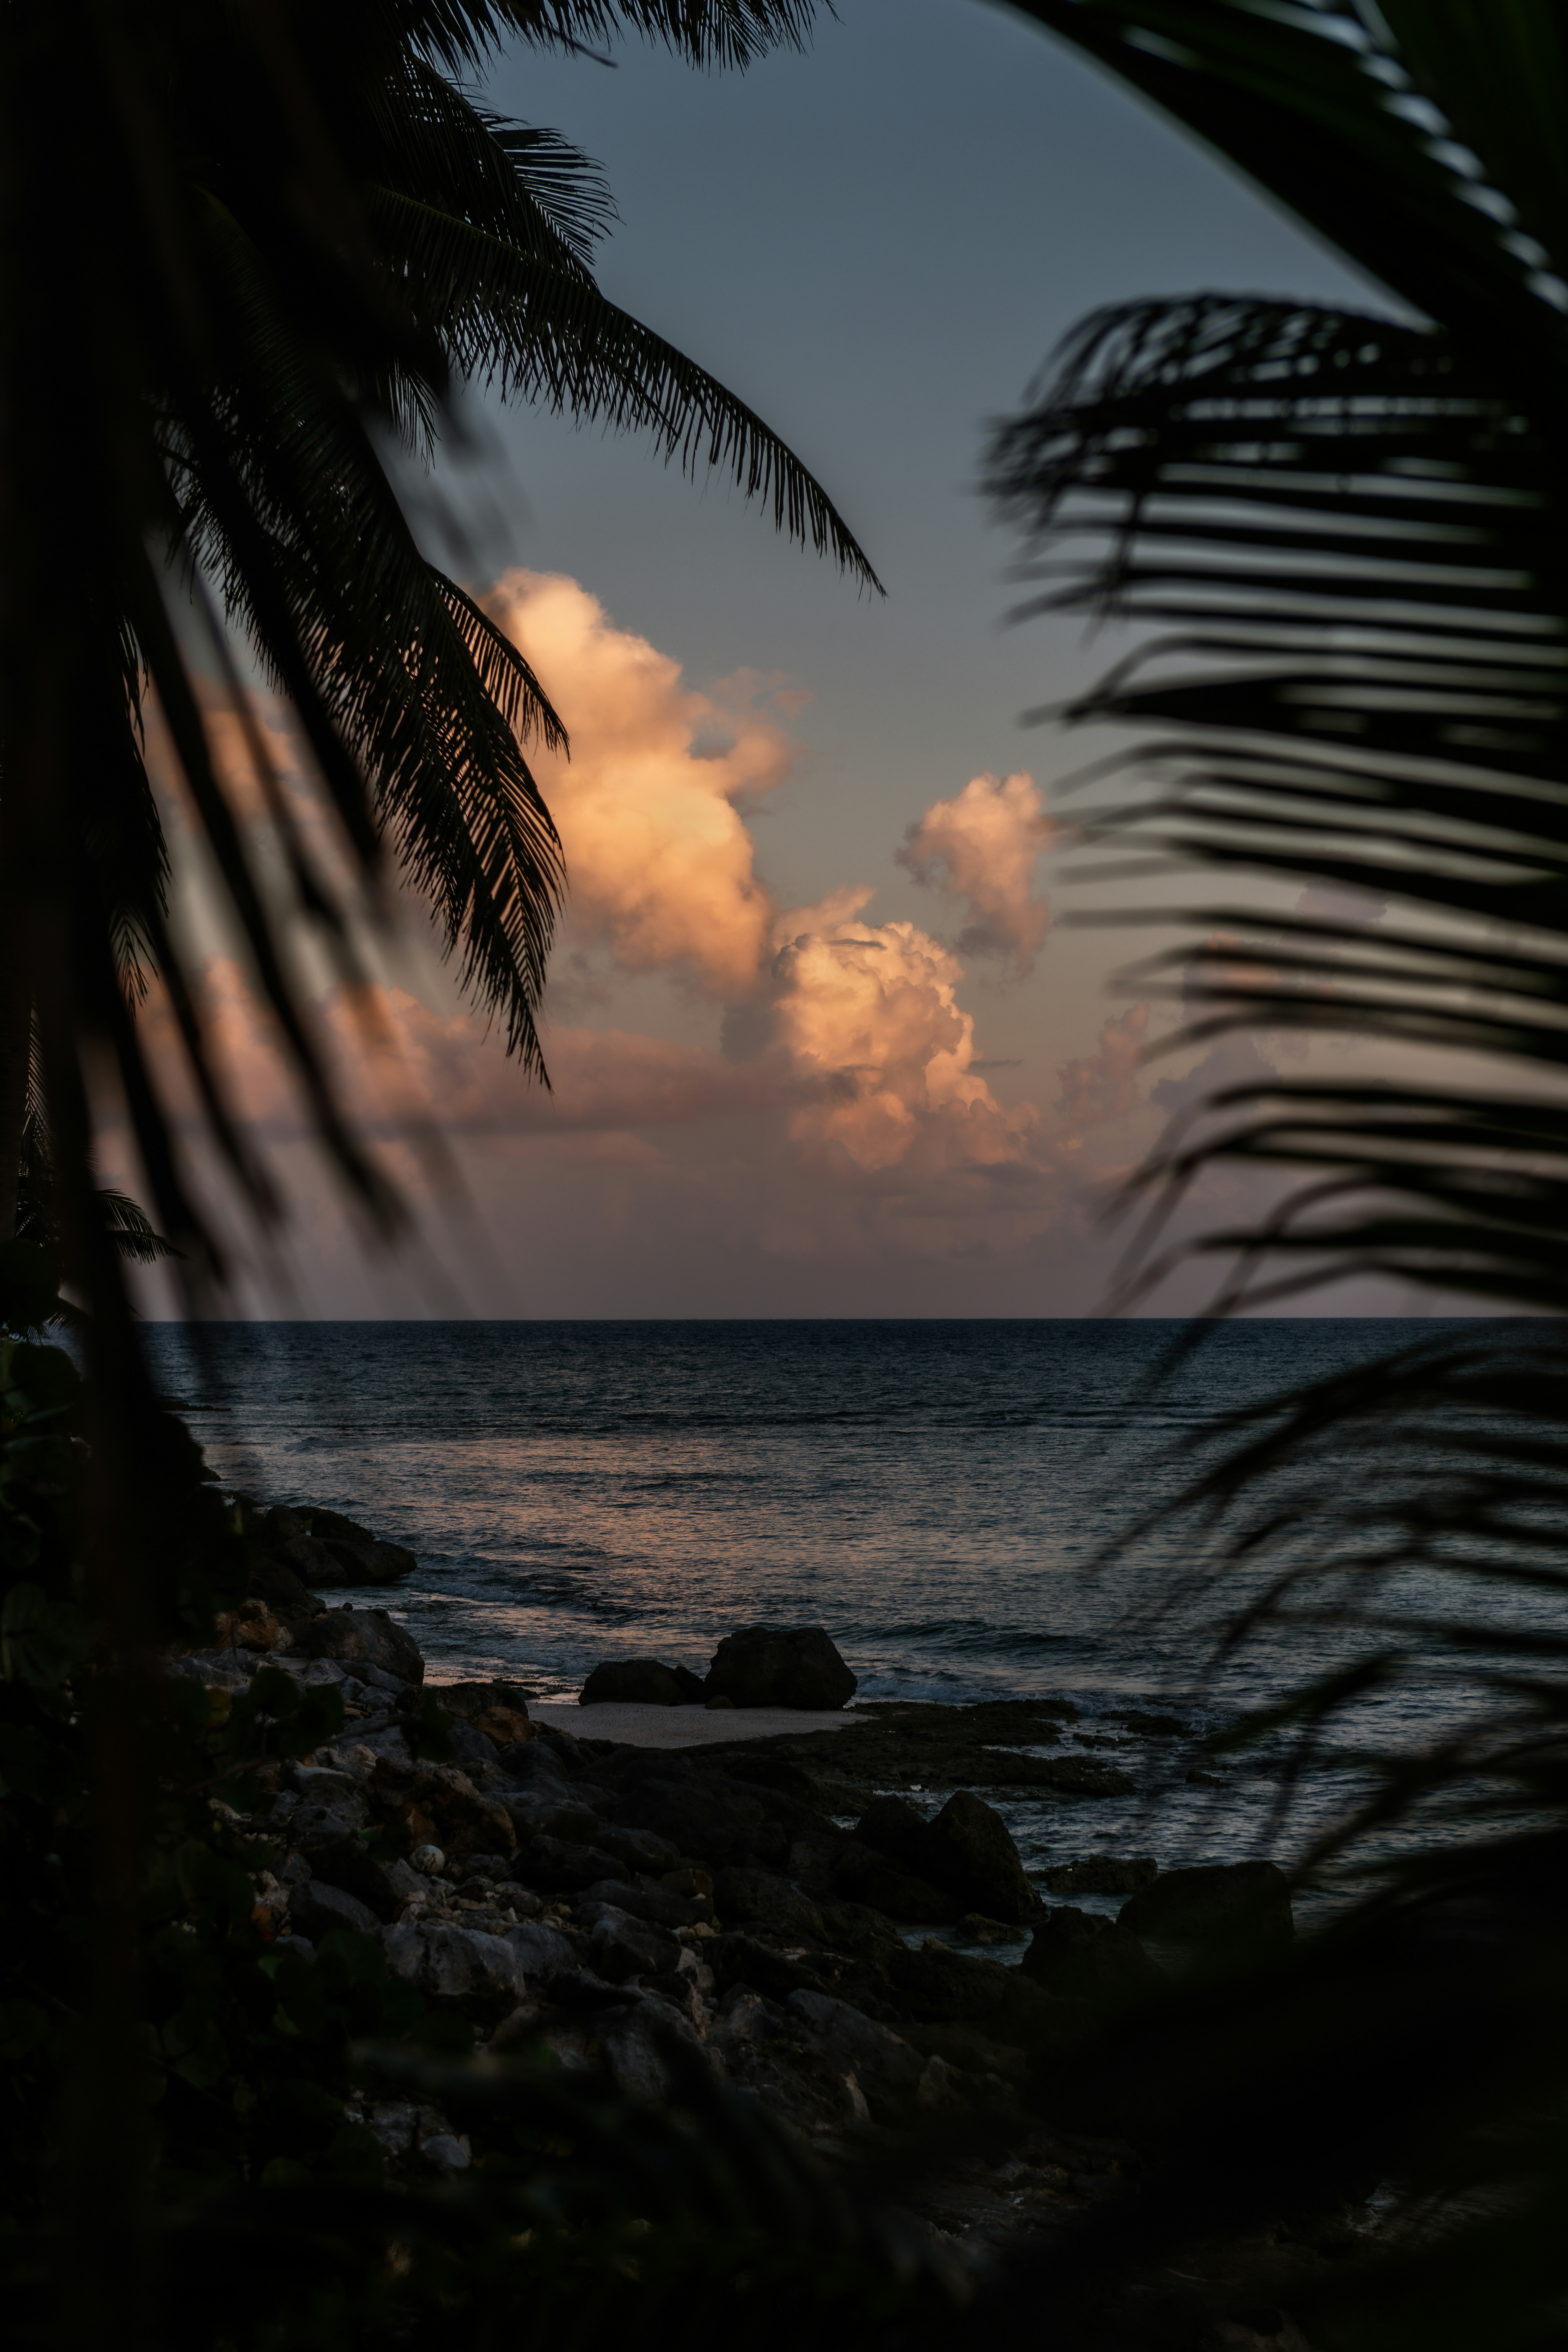 silhouette of palm trees near body of water during sunset